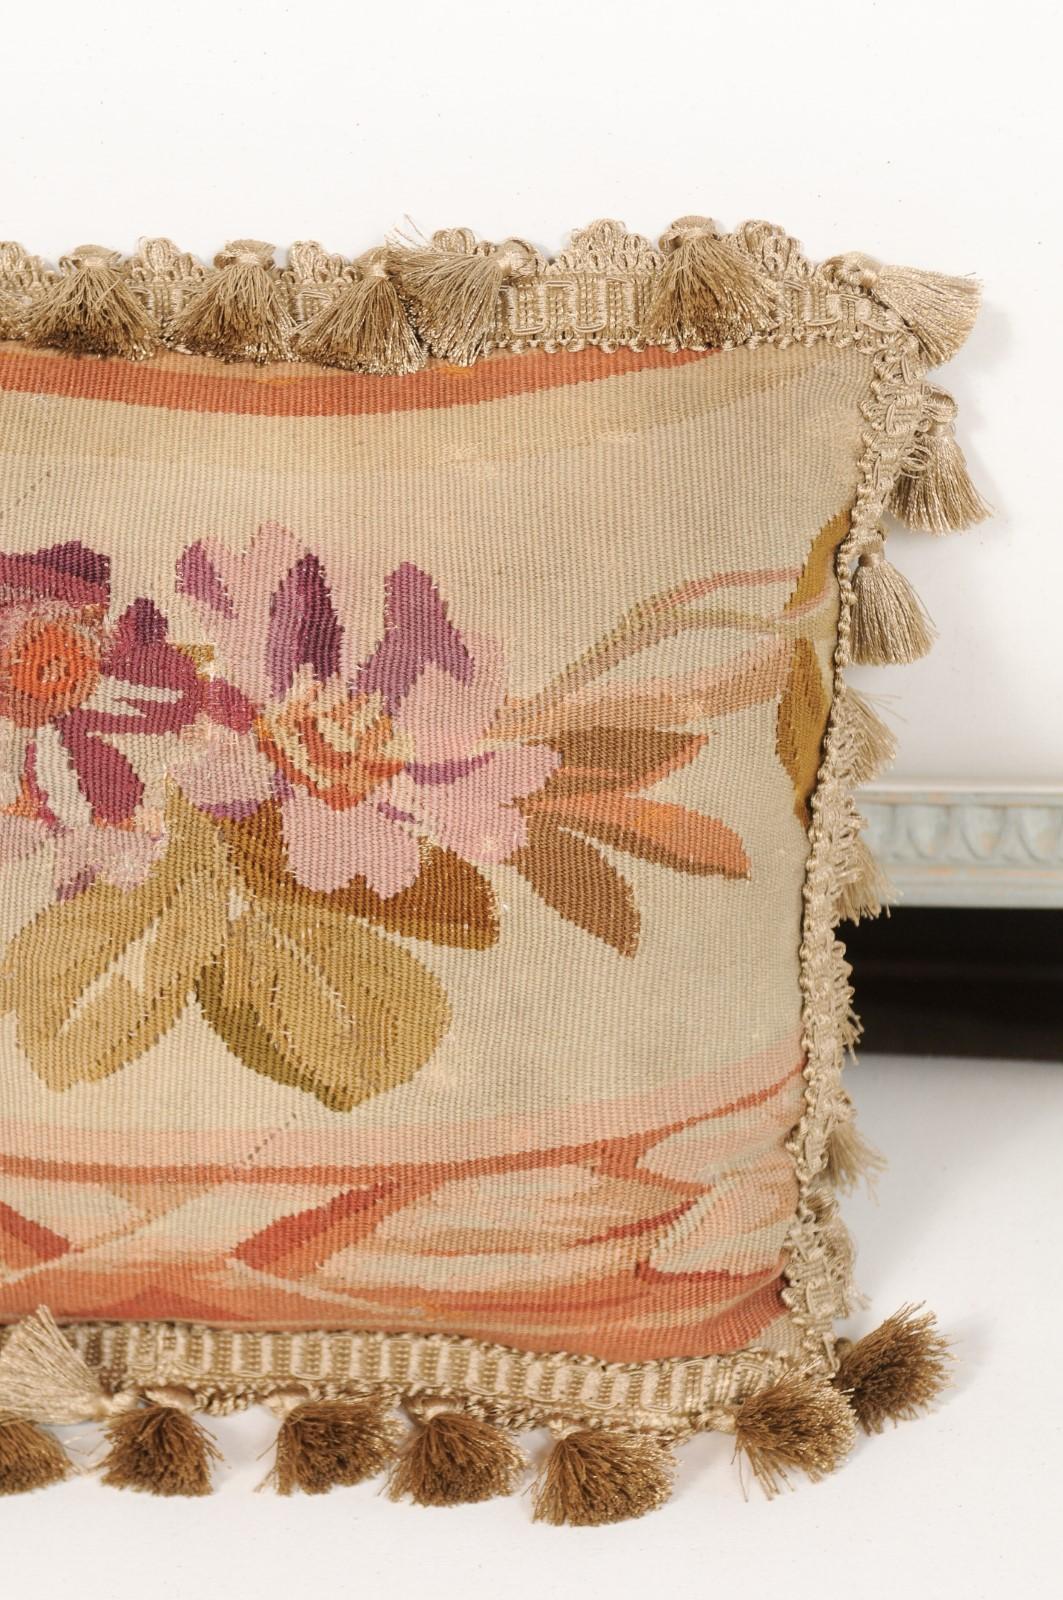 19th Century French Aubusson Tapestry Pillow with Purple Flowers and Tassels For Sale 2